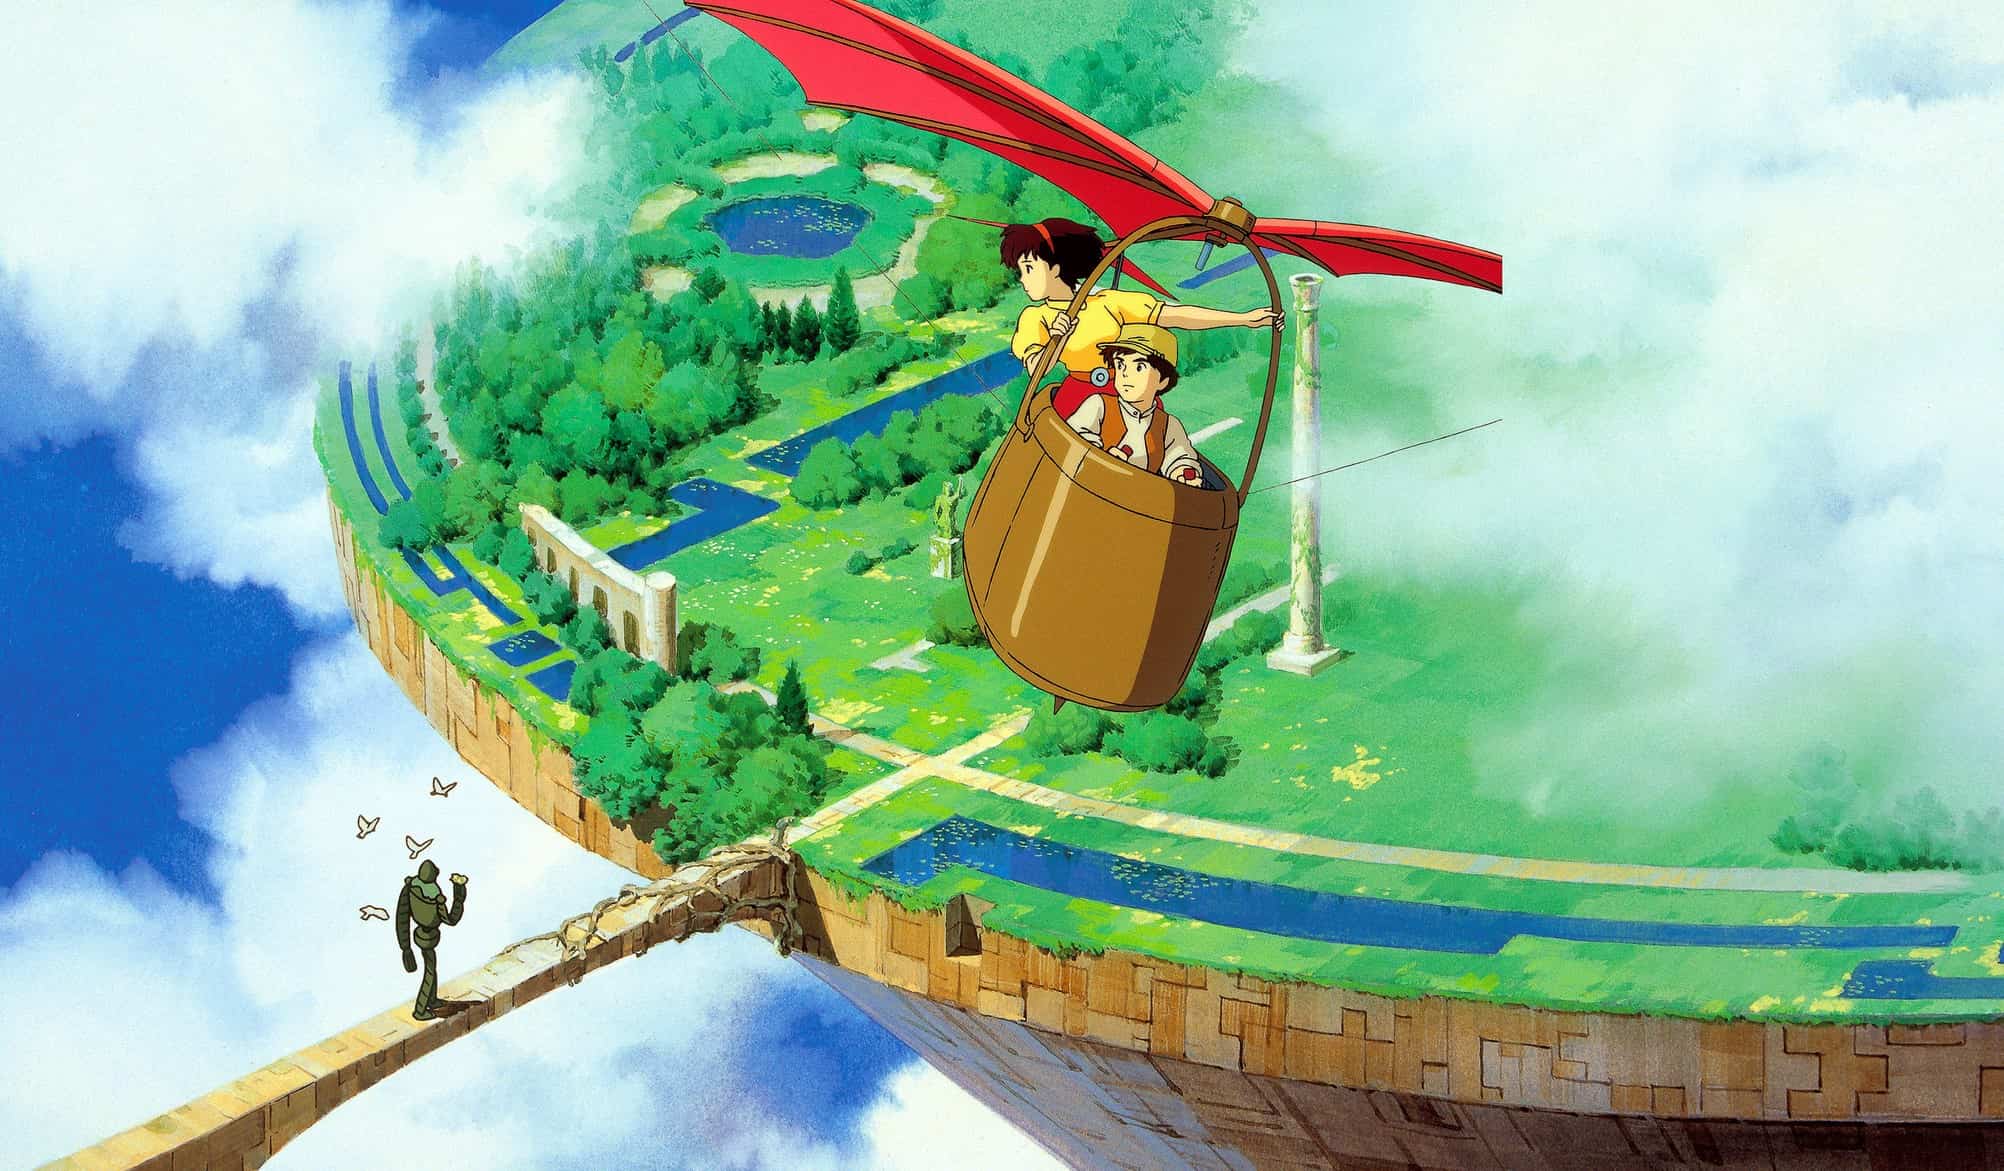 An animated boy and girl fly above a floating garden in this image from Studio Ghibli.